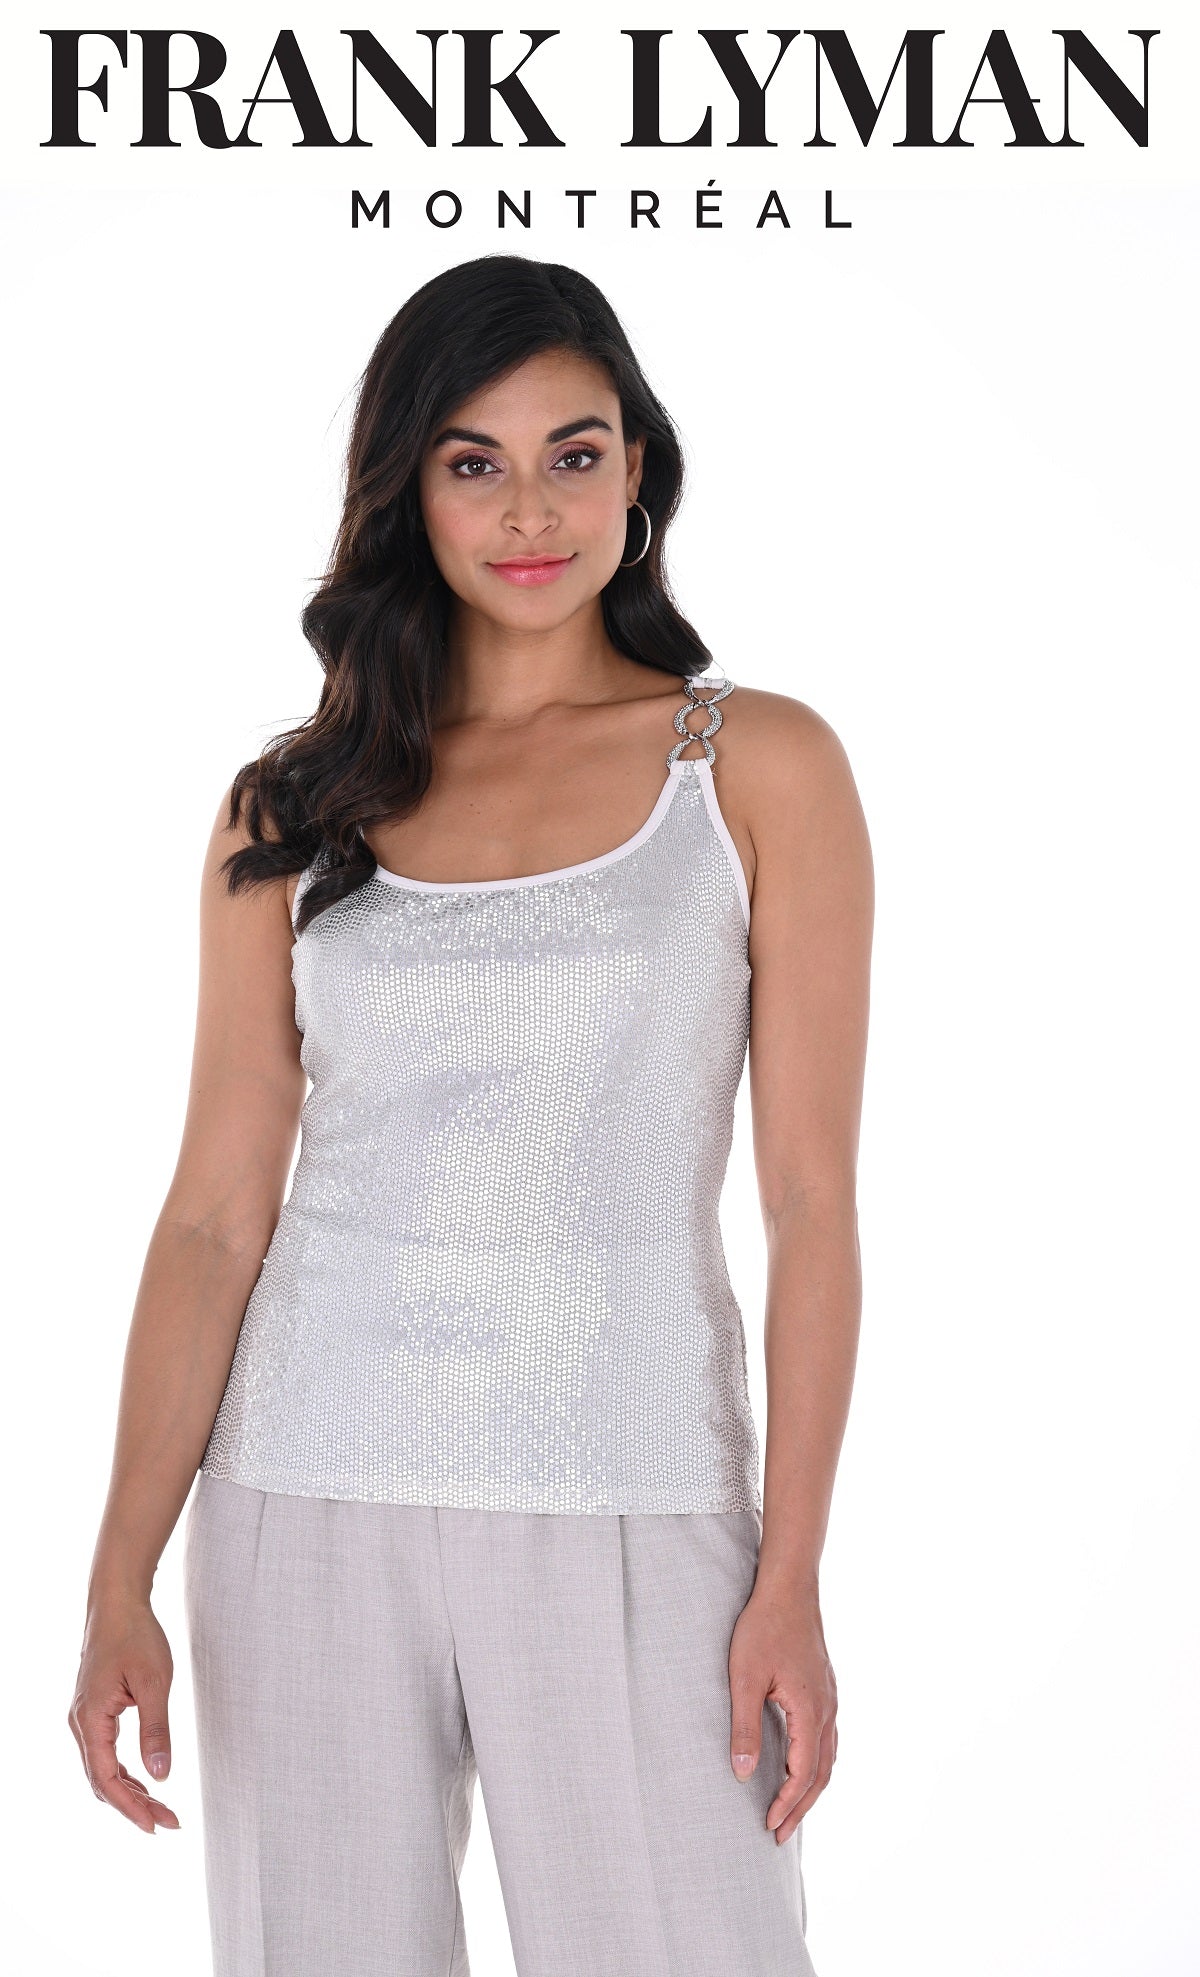 Frank Lyman Montreal Champagne Metallic Camisole With Shoulder Detail